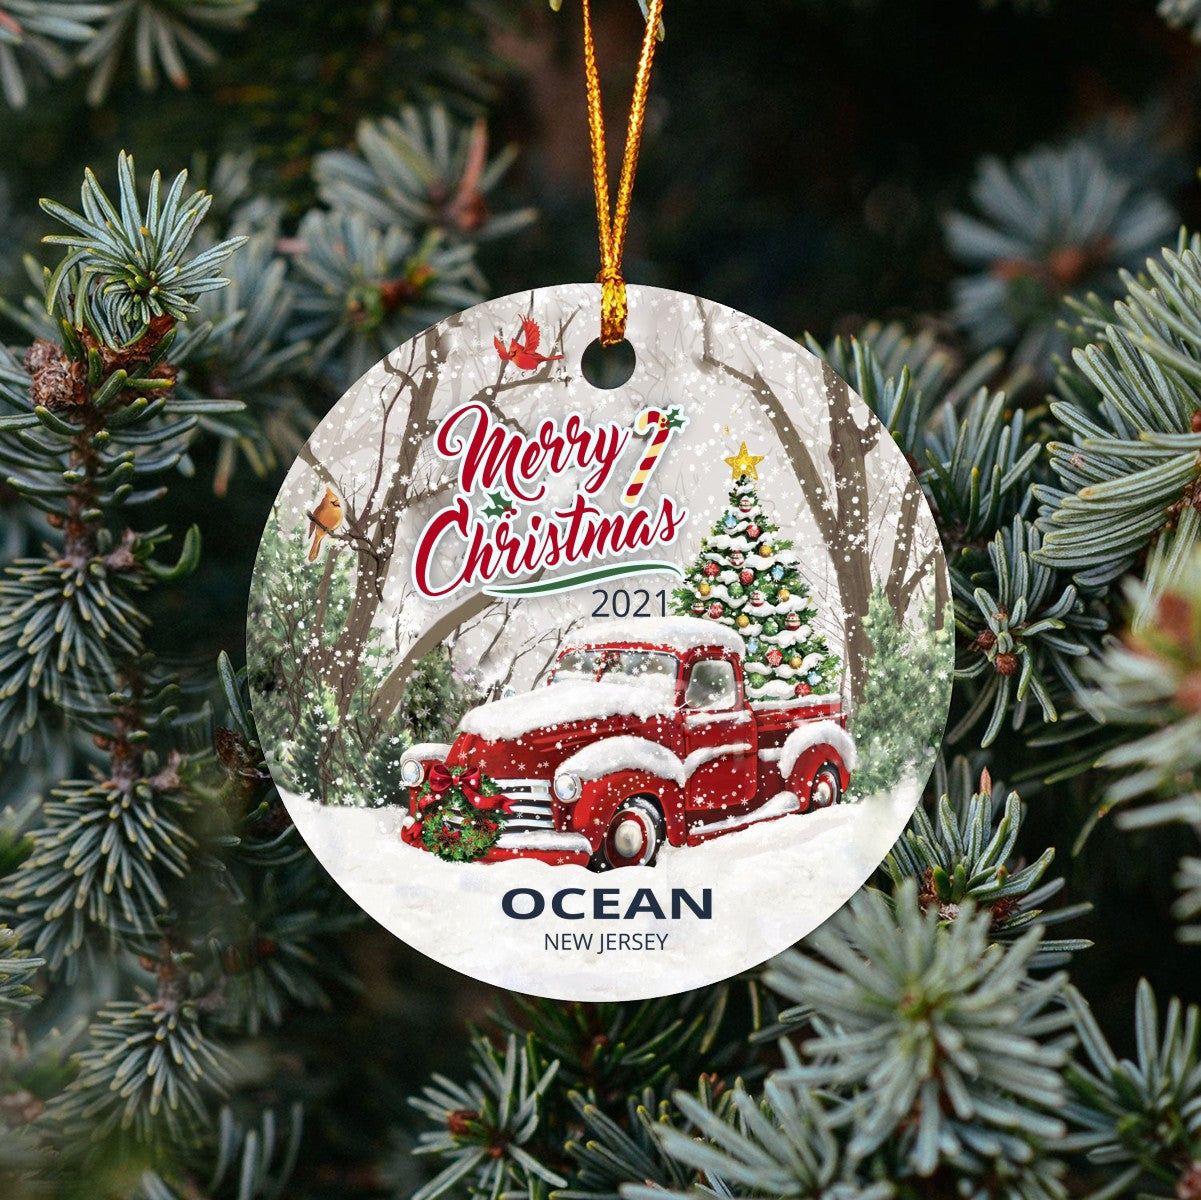 Christmas Tree Ornaments Ocean - Ornament With Name City, State Ocean New Jersey NJ Ornament - Red Truck Xmas Ornaments 3'' Plastic Gift For Family, Friend And Housewarming